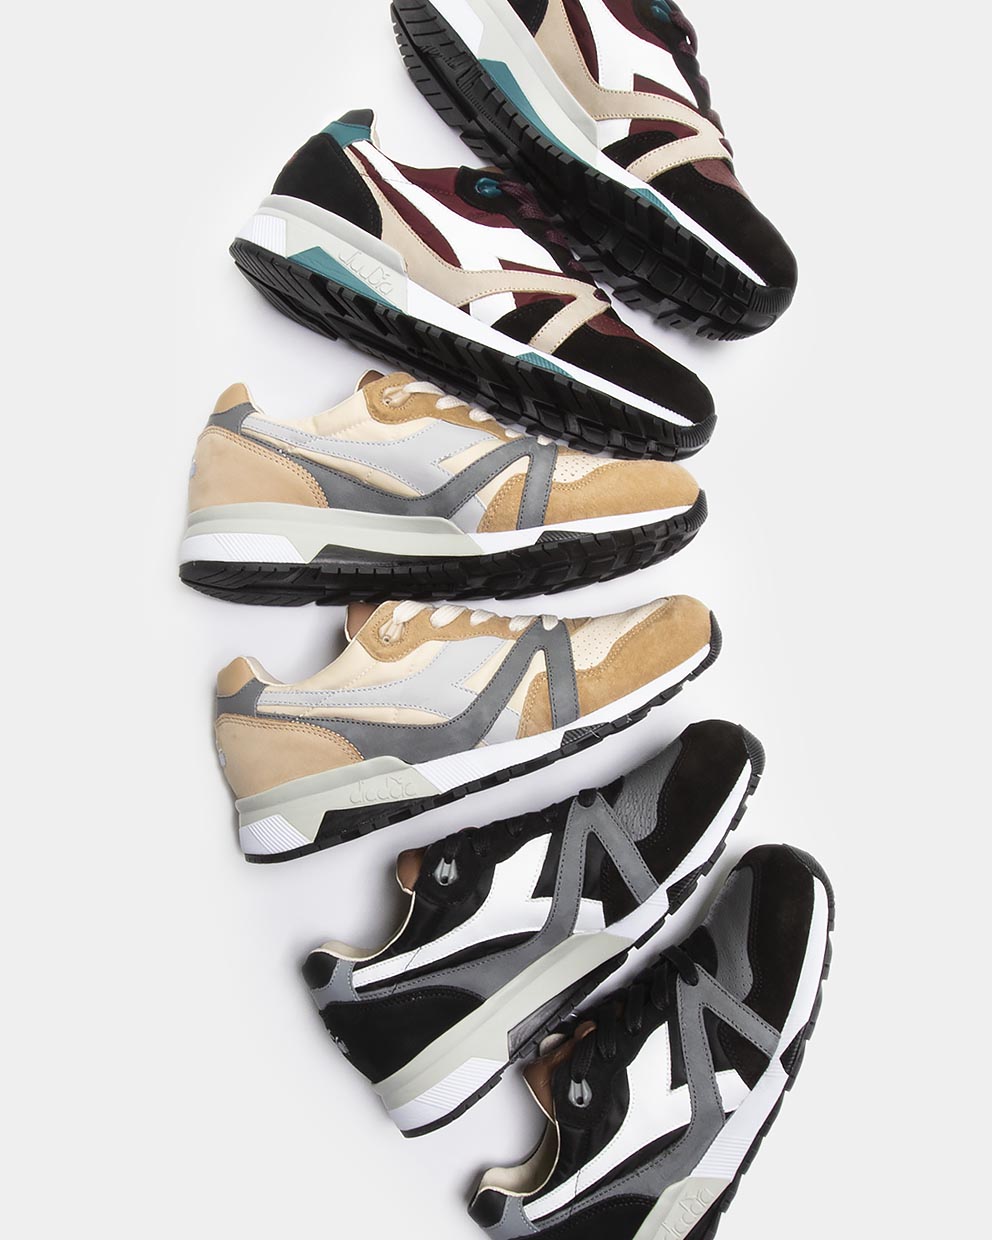 Fall Footwear arrivals from Diadora article image